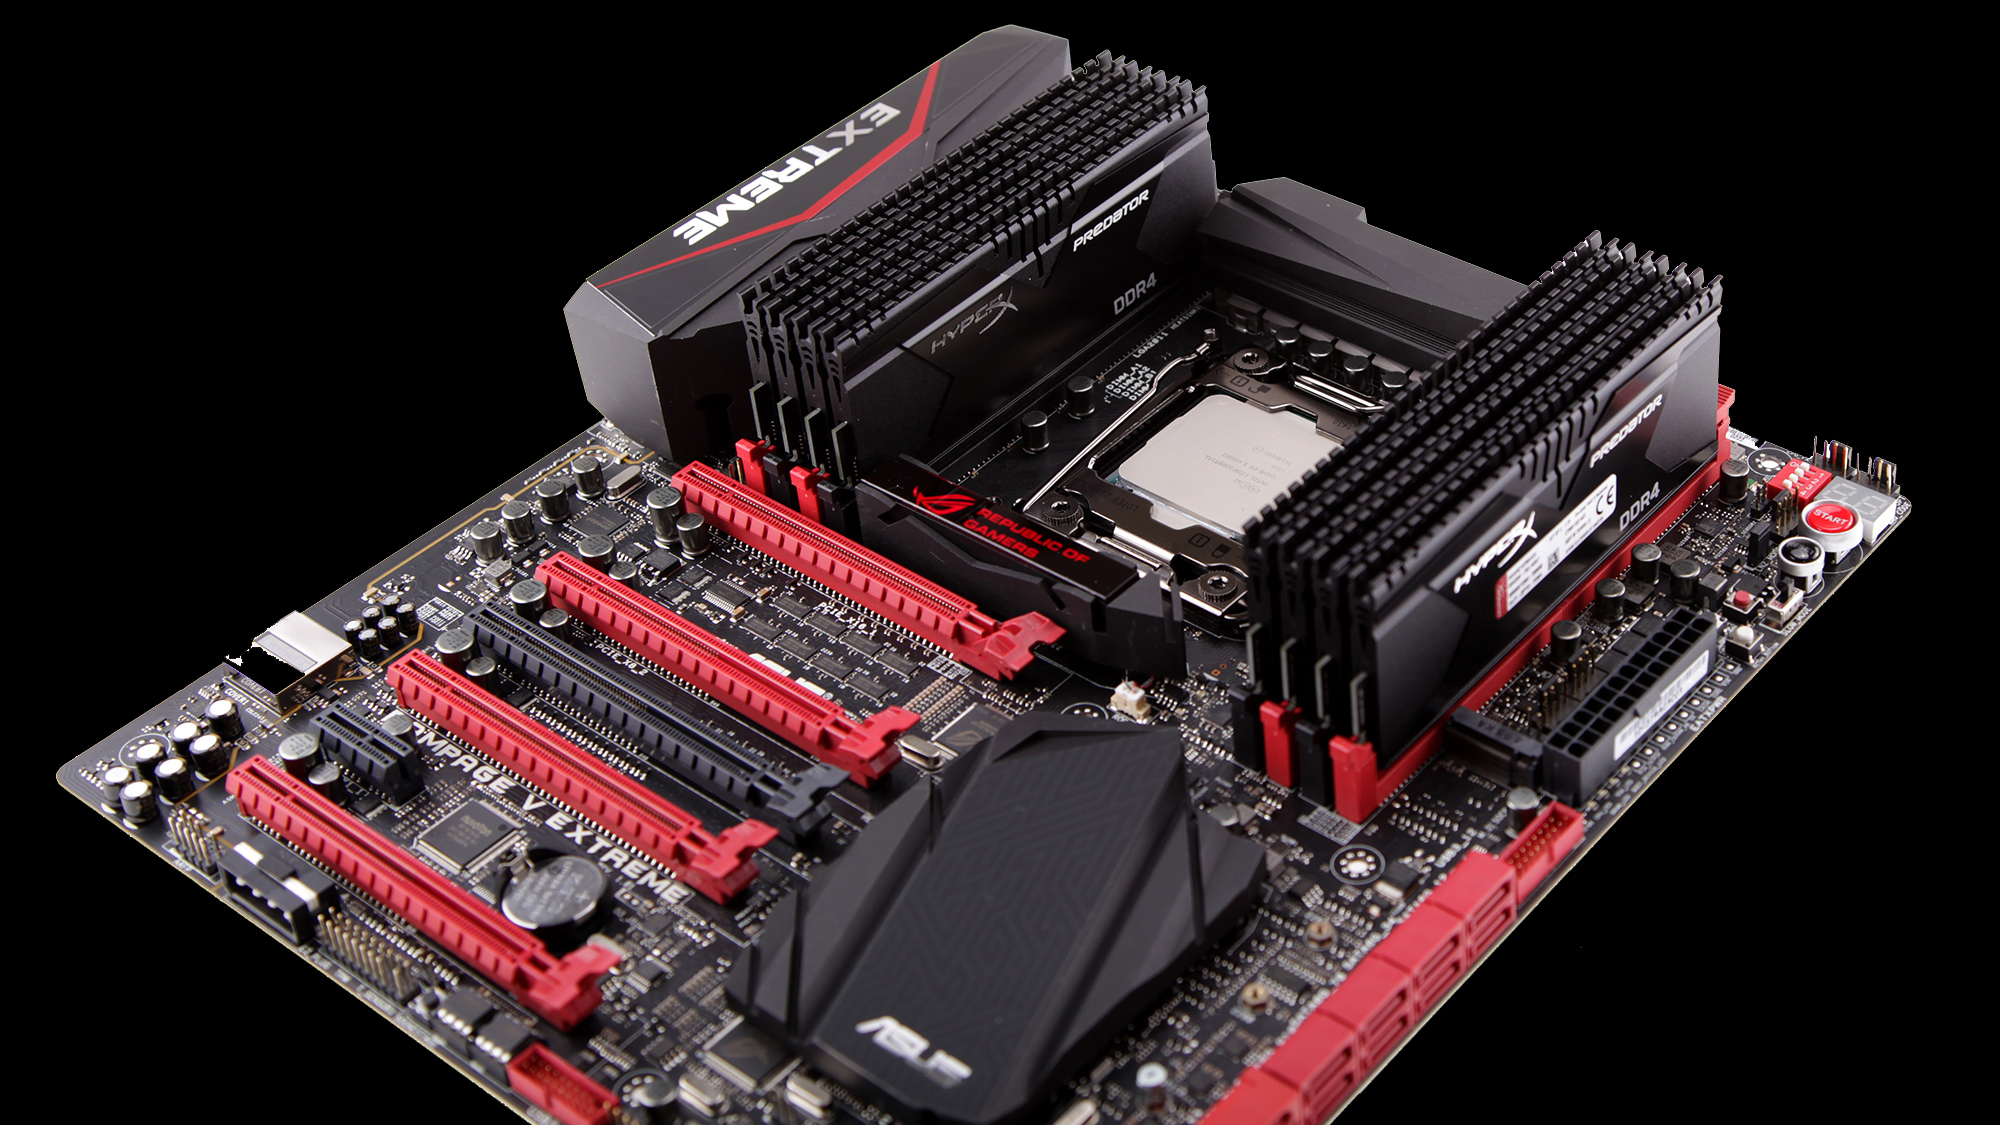 Motherboard support. ASUS Rampage x99. ASUS Rampage v extreme x99. ASUS Rampage 5 extreme. ASUS ROG Rampage v extreme.